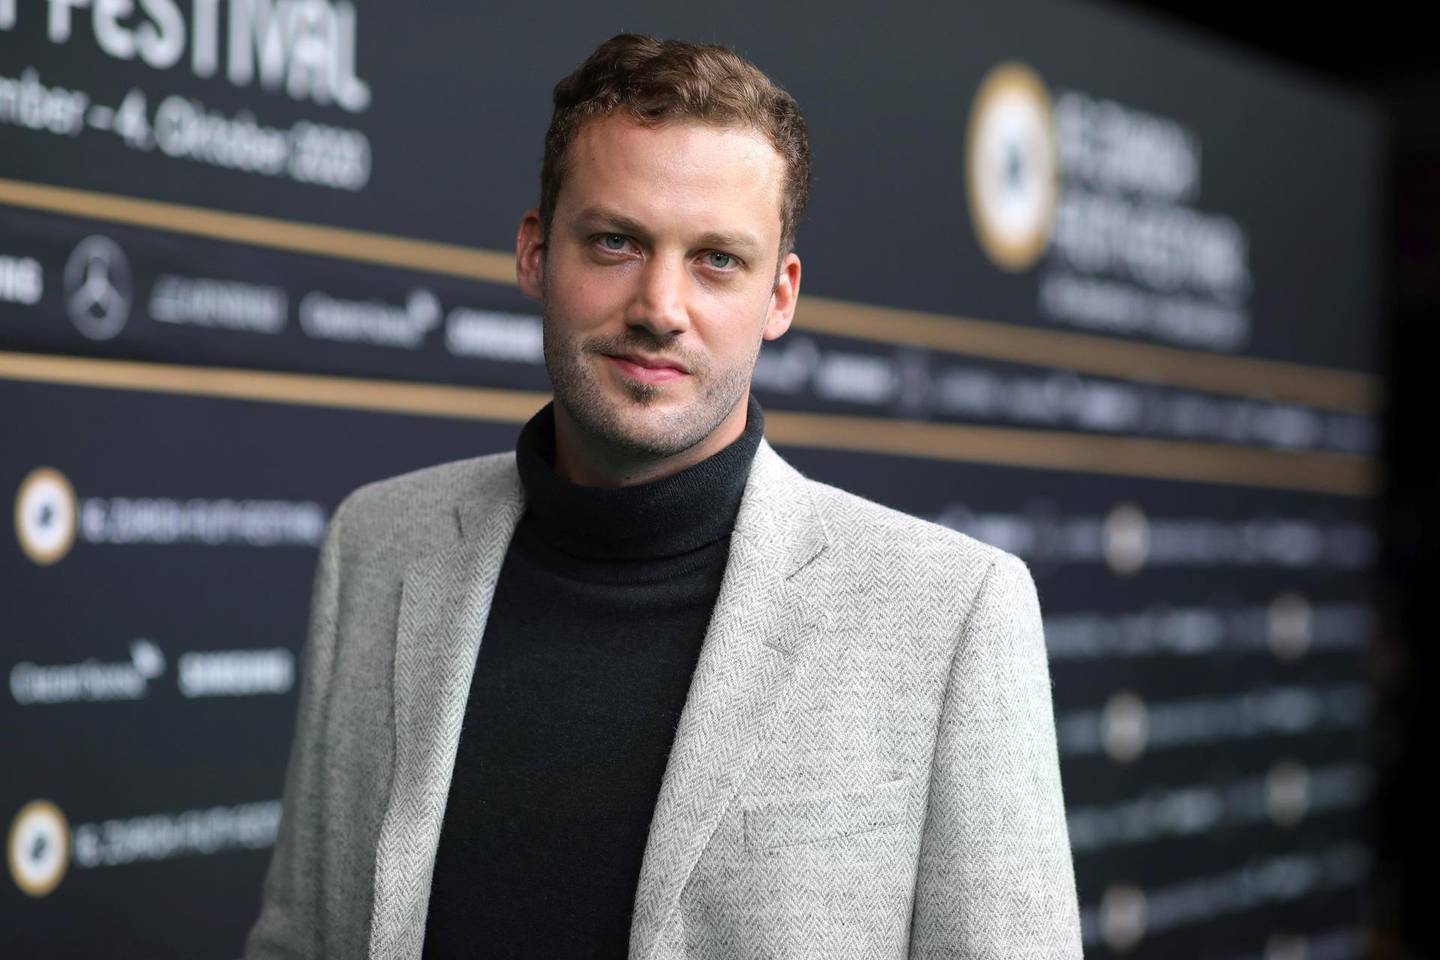 ZURICH, SWITZERLAND - OCTOBER 01:  Director Ben Sharrock  attends the "Limbo" photocall during the 16th Zurich Film Festival at Kino Corso on October 01, 2020 in Zurich, Switzerland. (Photo by Andreas Rentz/Getty Images for ZFF)